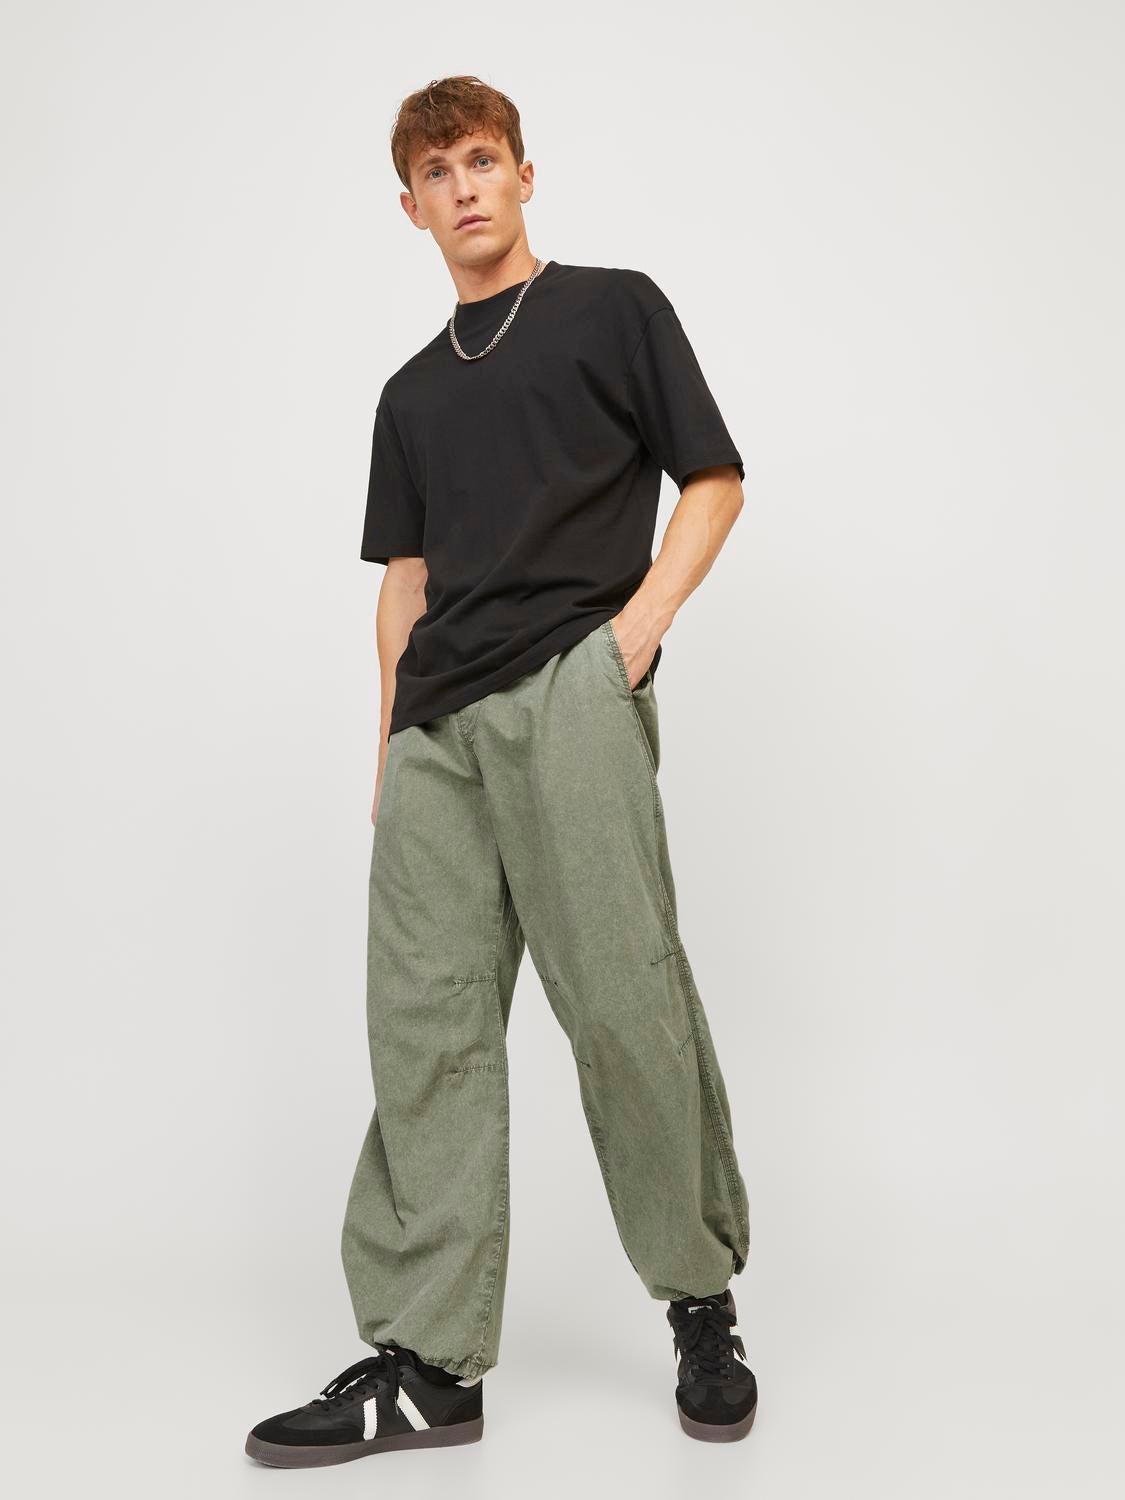 Vintage Loose Fit Pants New Jersey, grey | Rumble59 - Official Rumble59  Shop for Jeans, Jackets & Clothing